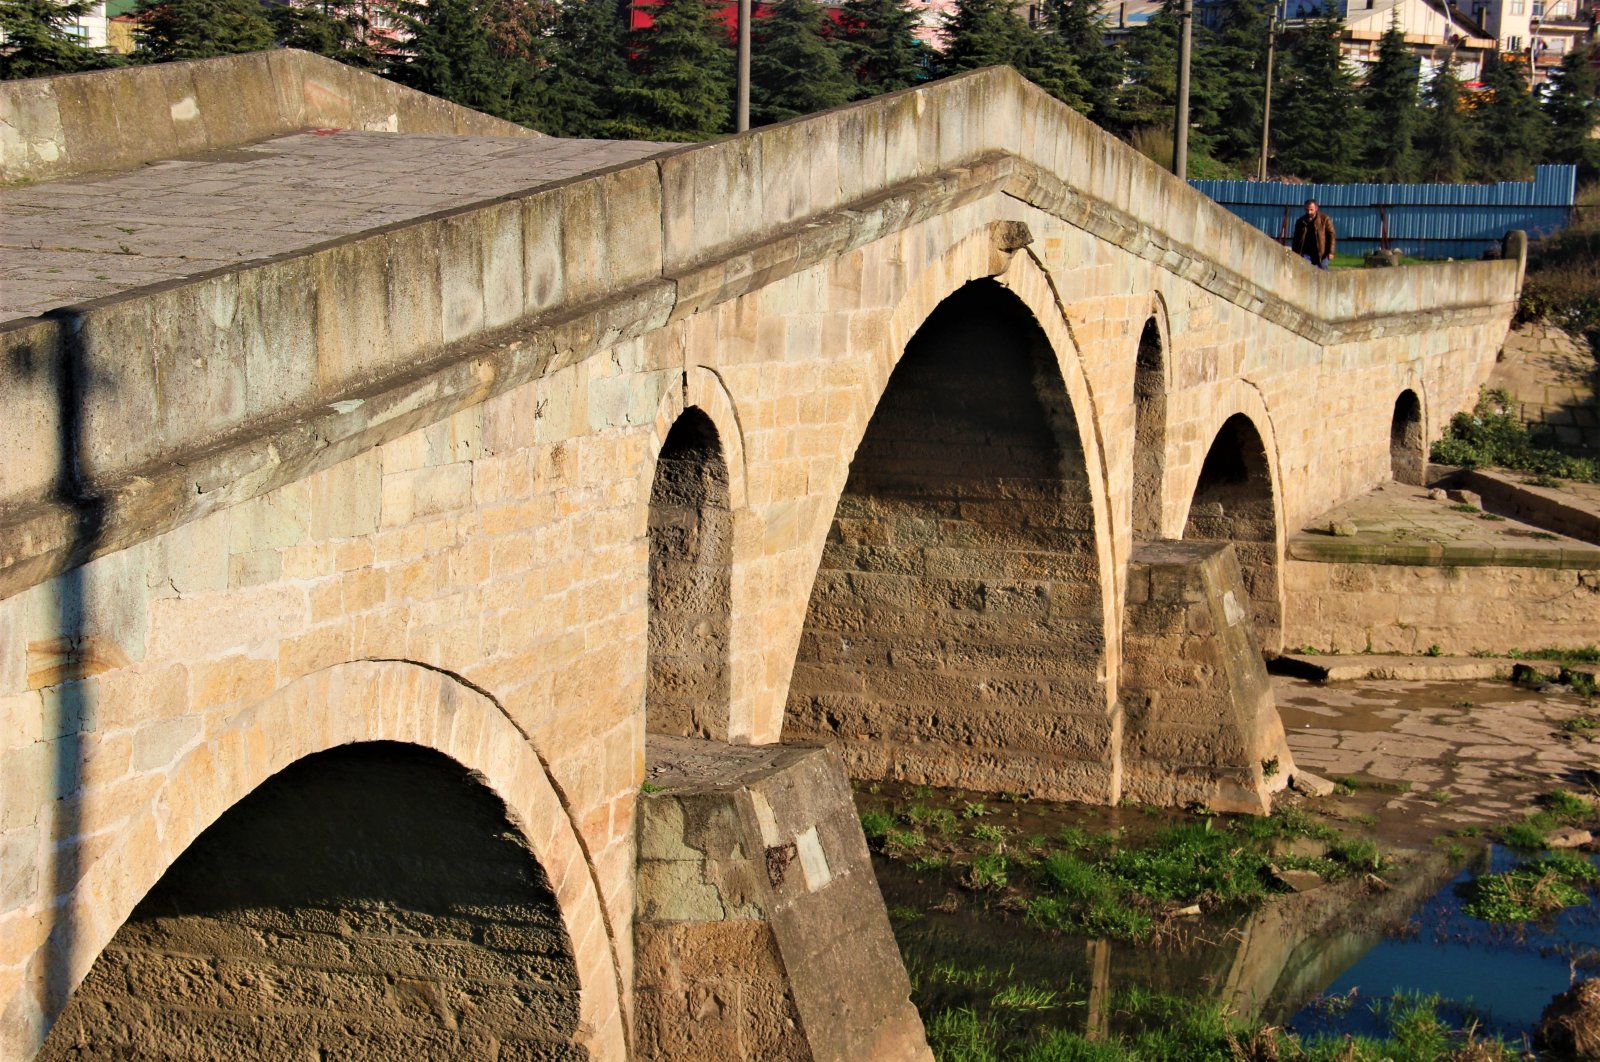 Turkish bridge from the 16th century on the "Baghdad Road" standing strong despite military expeditions and natural disasters due to its special architectual design, Kocaeli, western Turkey, Jan. 10, 2022. (IHA Photo)